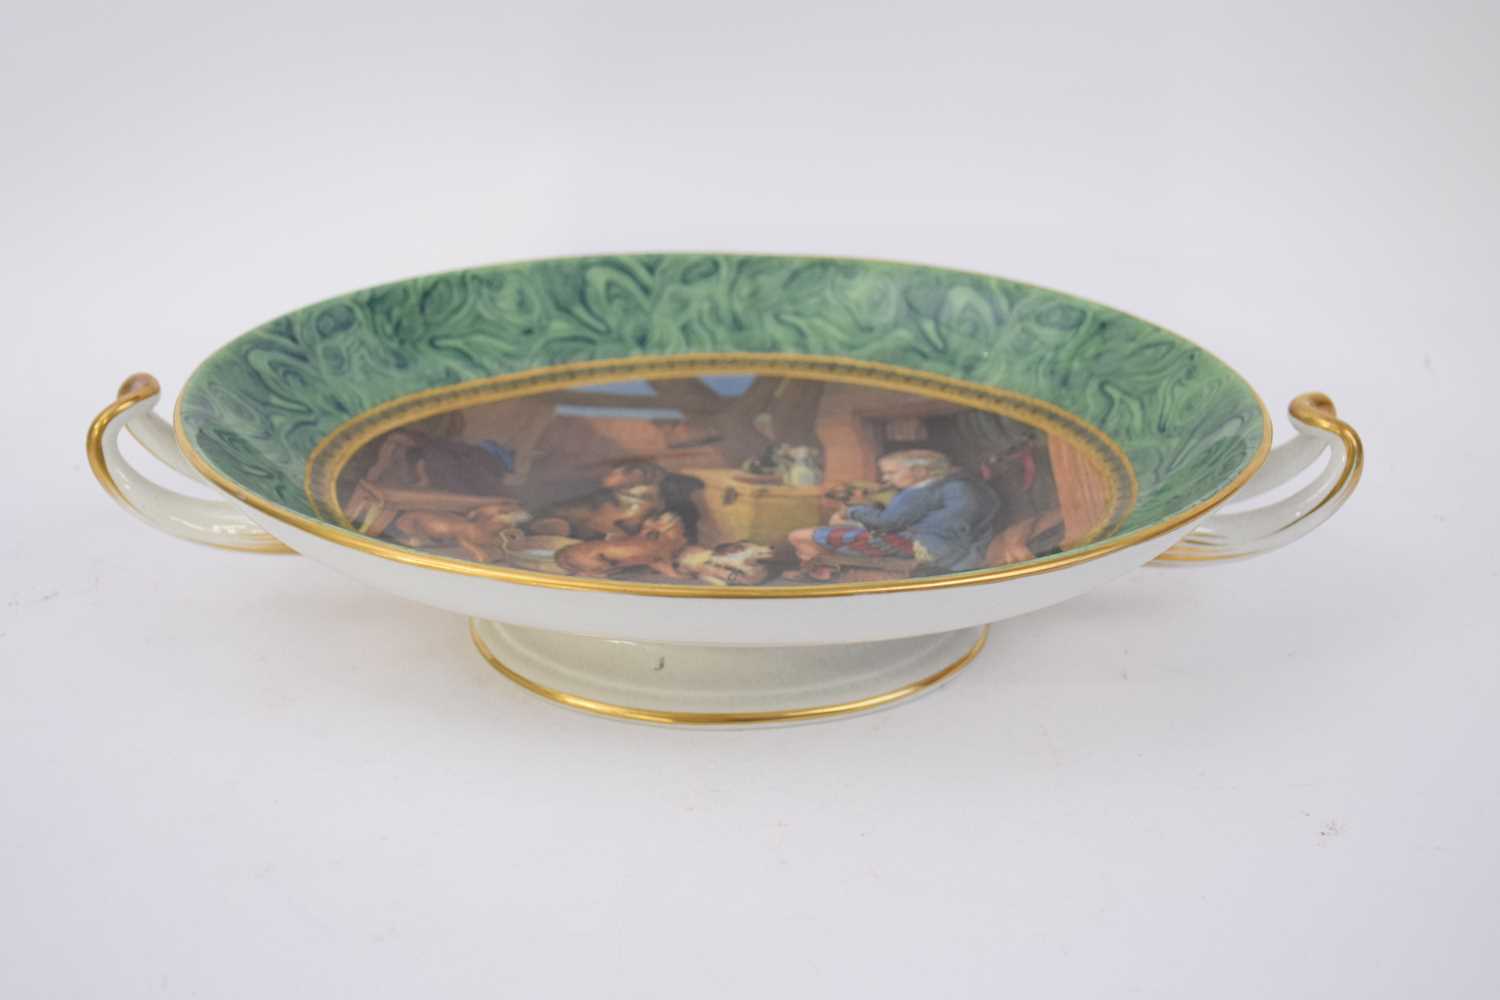 Pratt ware two-handled dish with typical design to the centre of a Scottish bagpiper surrounded by - Image 2 of 3